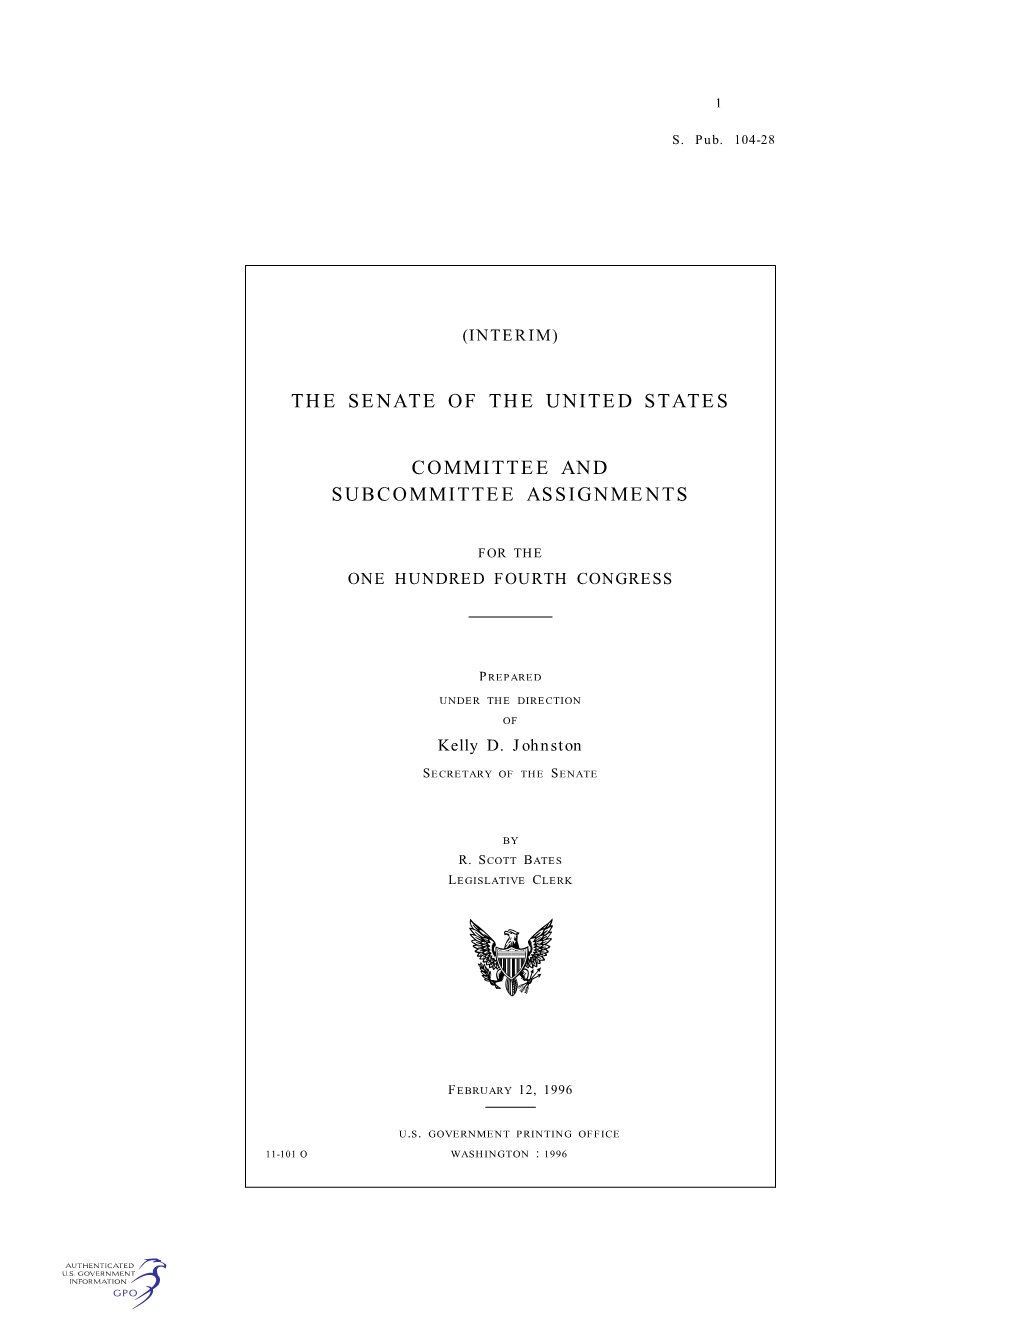 The Senate of the United States Committee